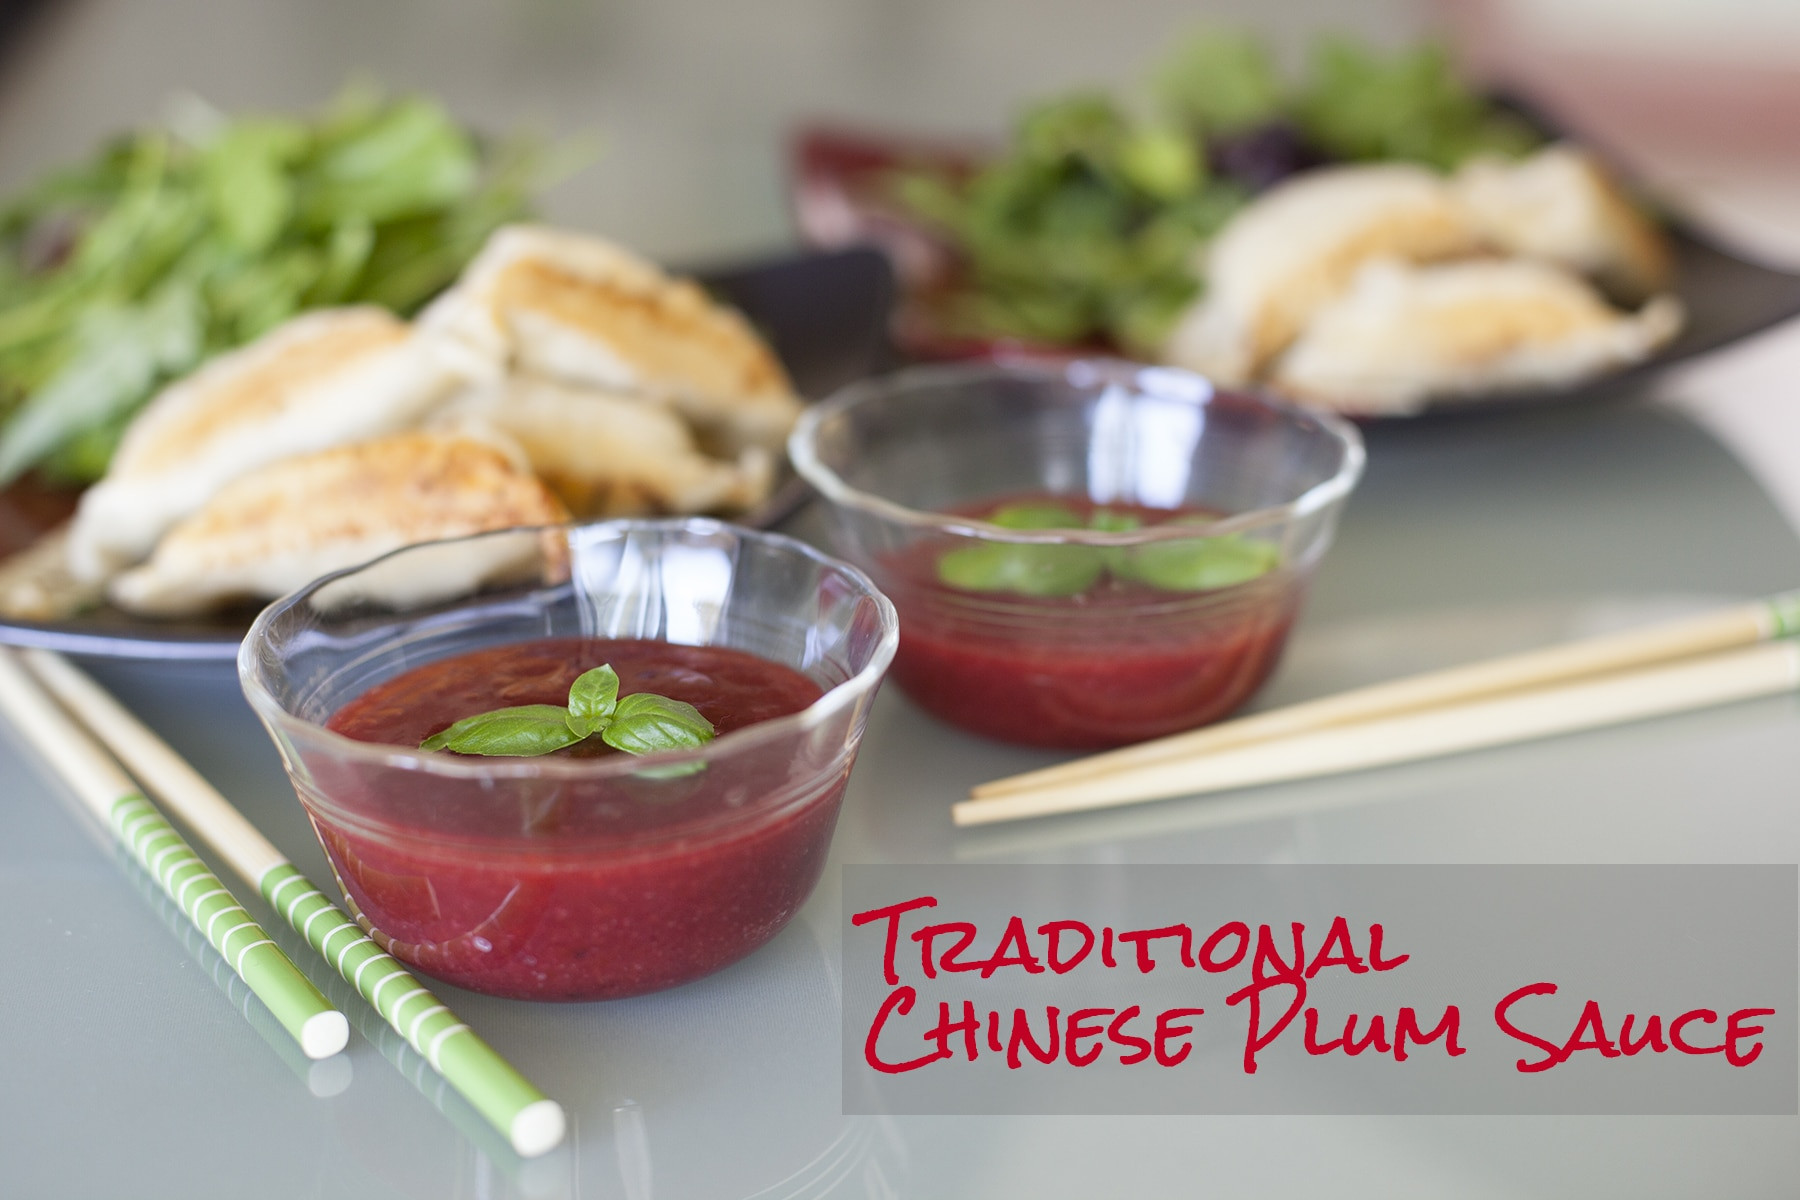 Asian Sauce Recipes
 Traditional Chinese Plum Sauce from Scratch